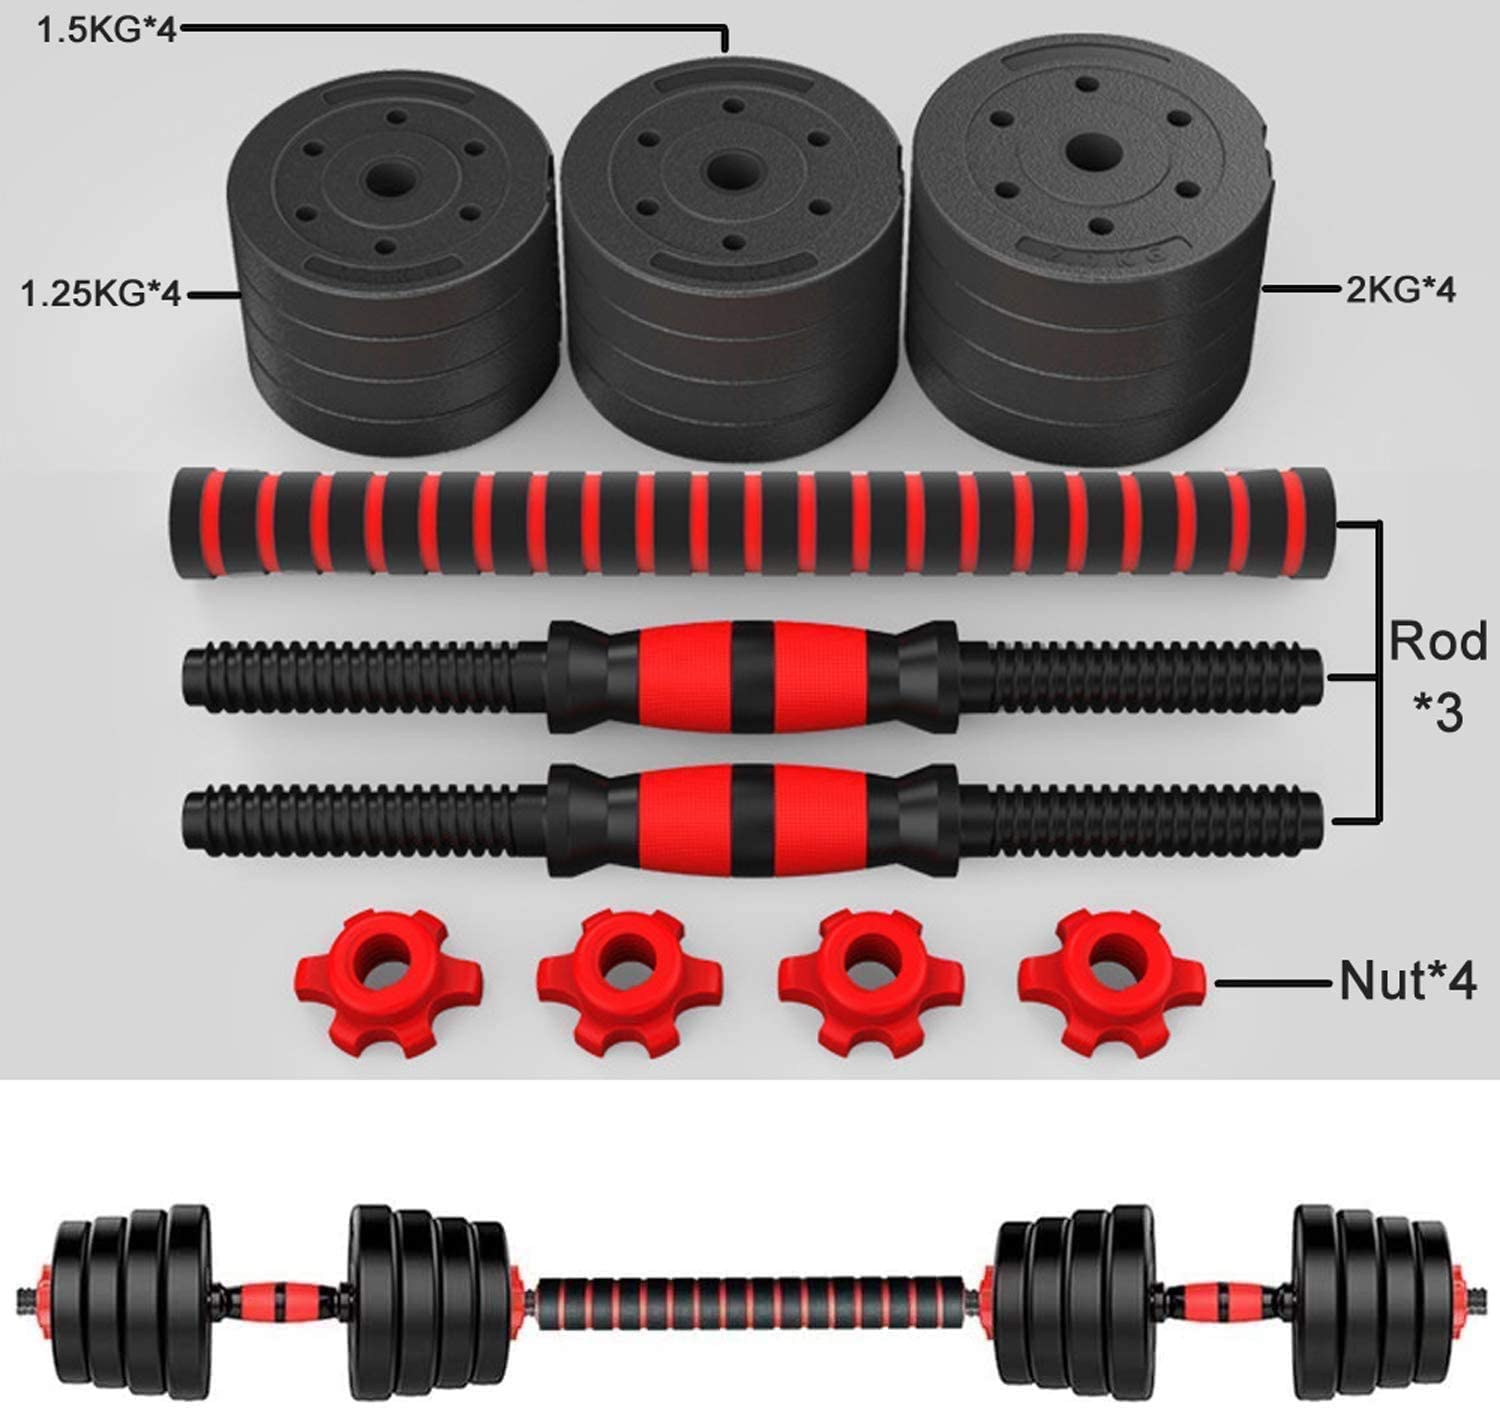 20kg dumbbell and Barbell Set Weightlifting fitness black cement steel rubber adjustable 20kgdumbbell and Barbell Set 2 in 1